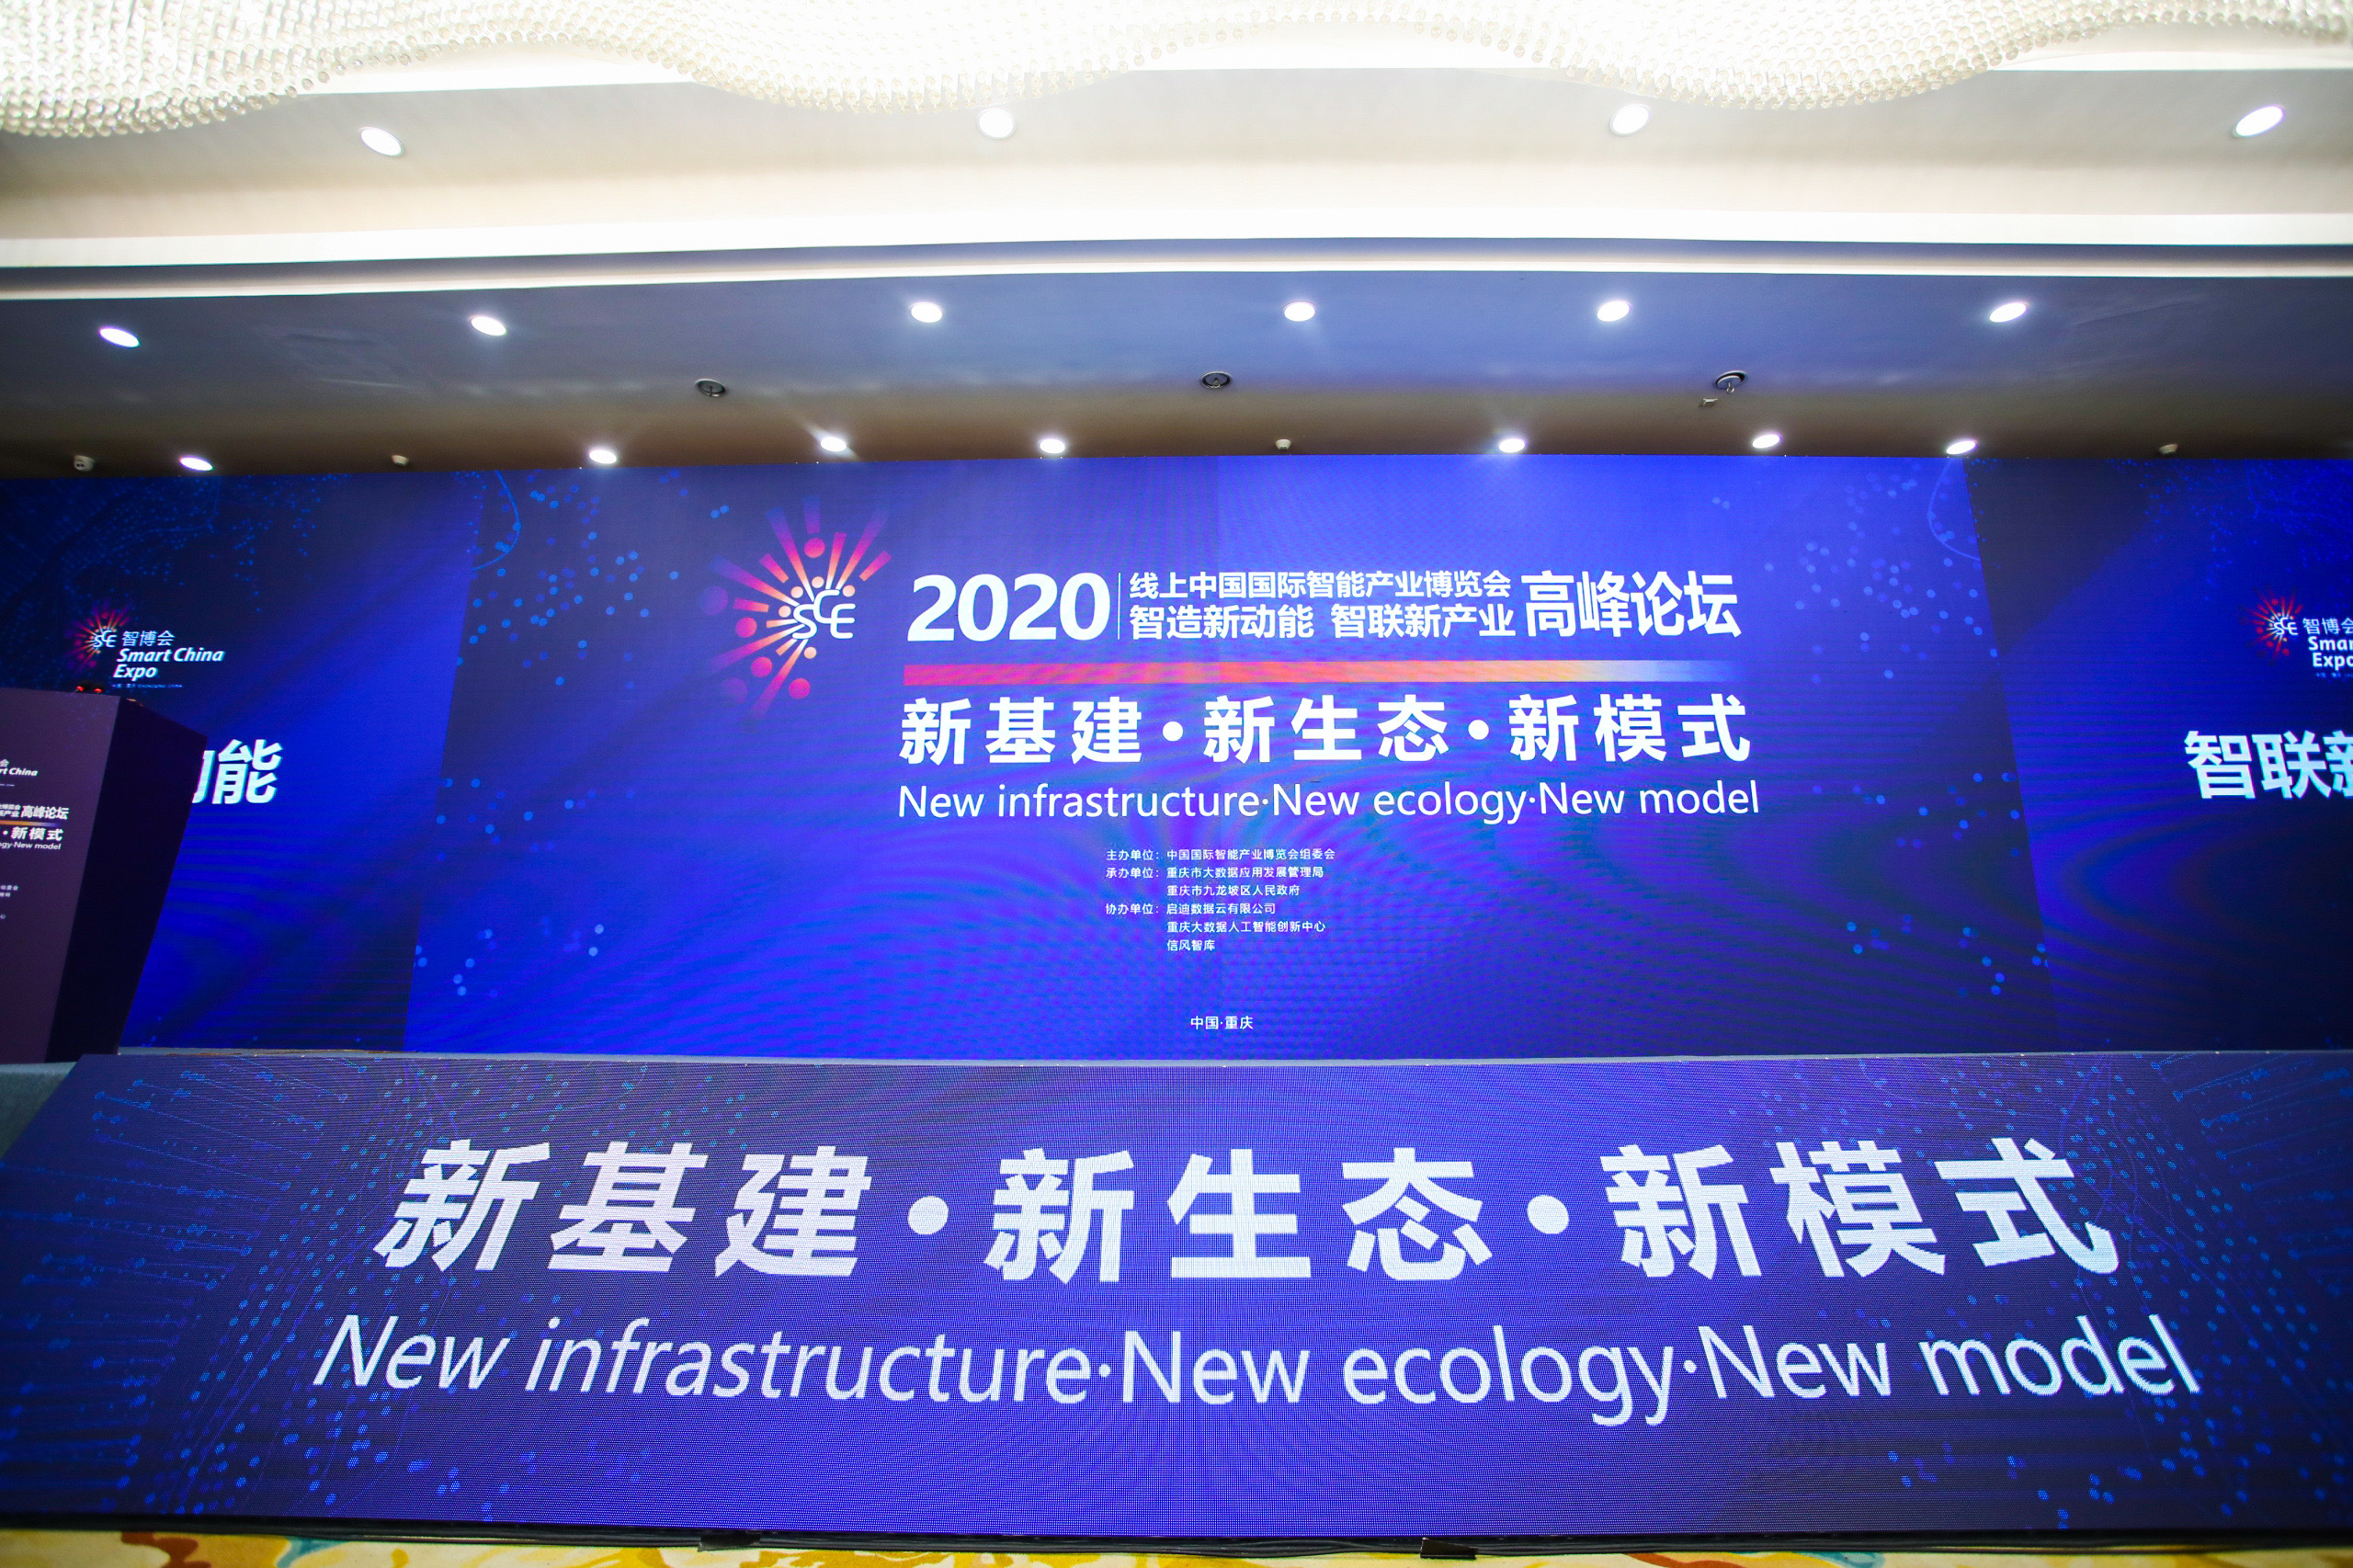 Smart China Expo, Thursday, September 3, 2020, Press release picture